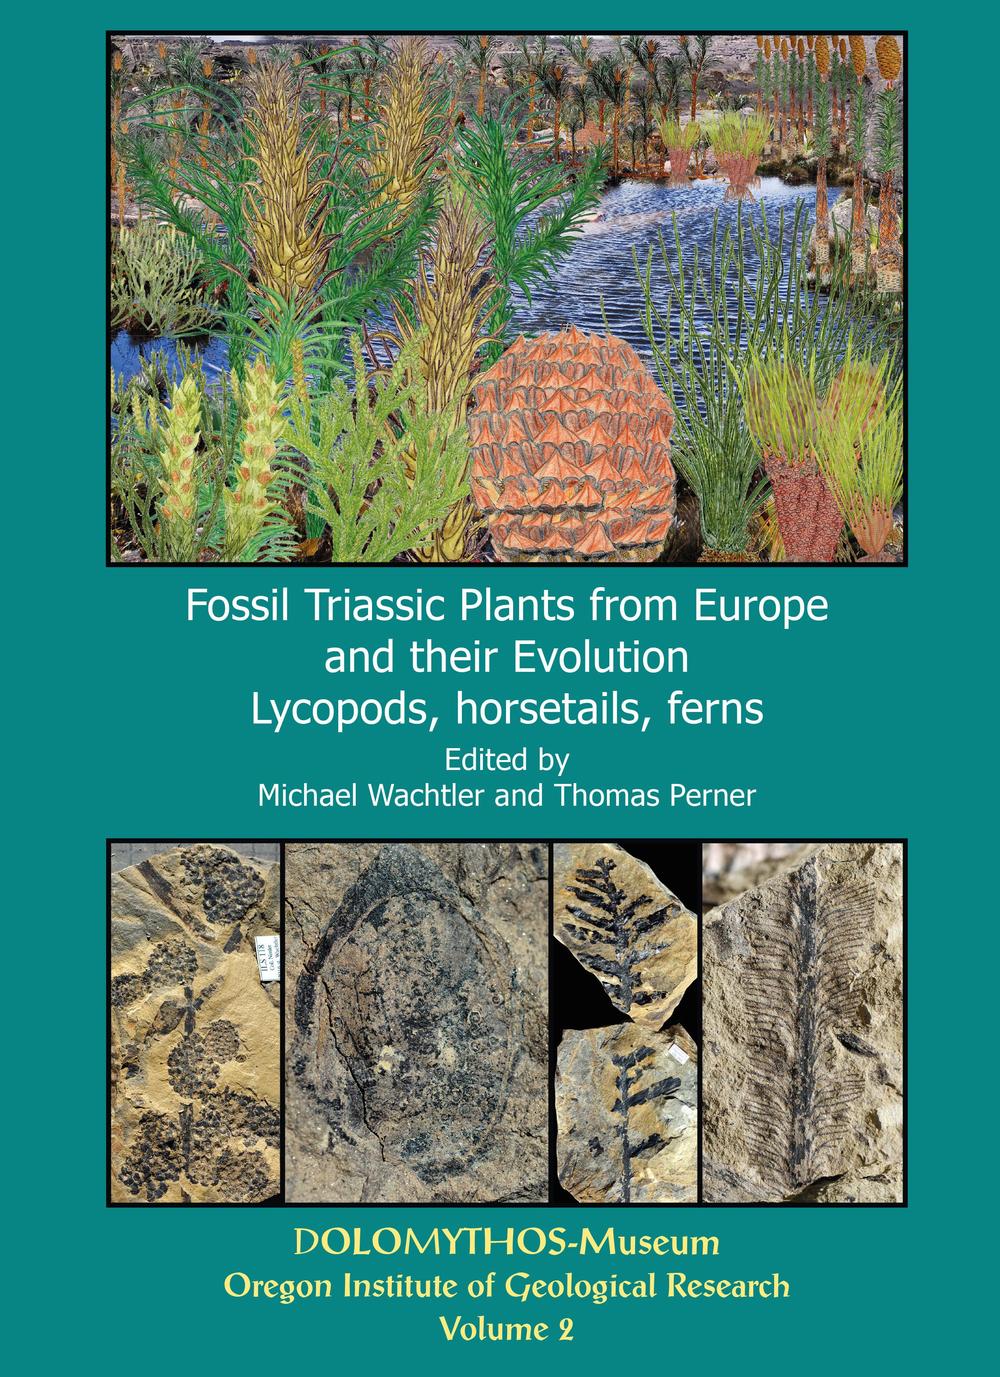 Fossil triassic plants from Europe and their evolution. Vol. 2: Lycopods, horsetails, ferns